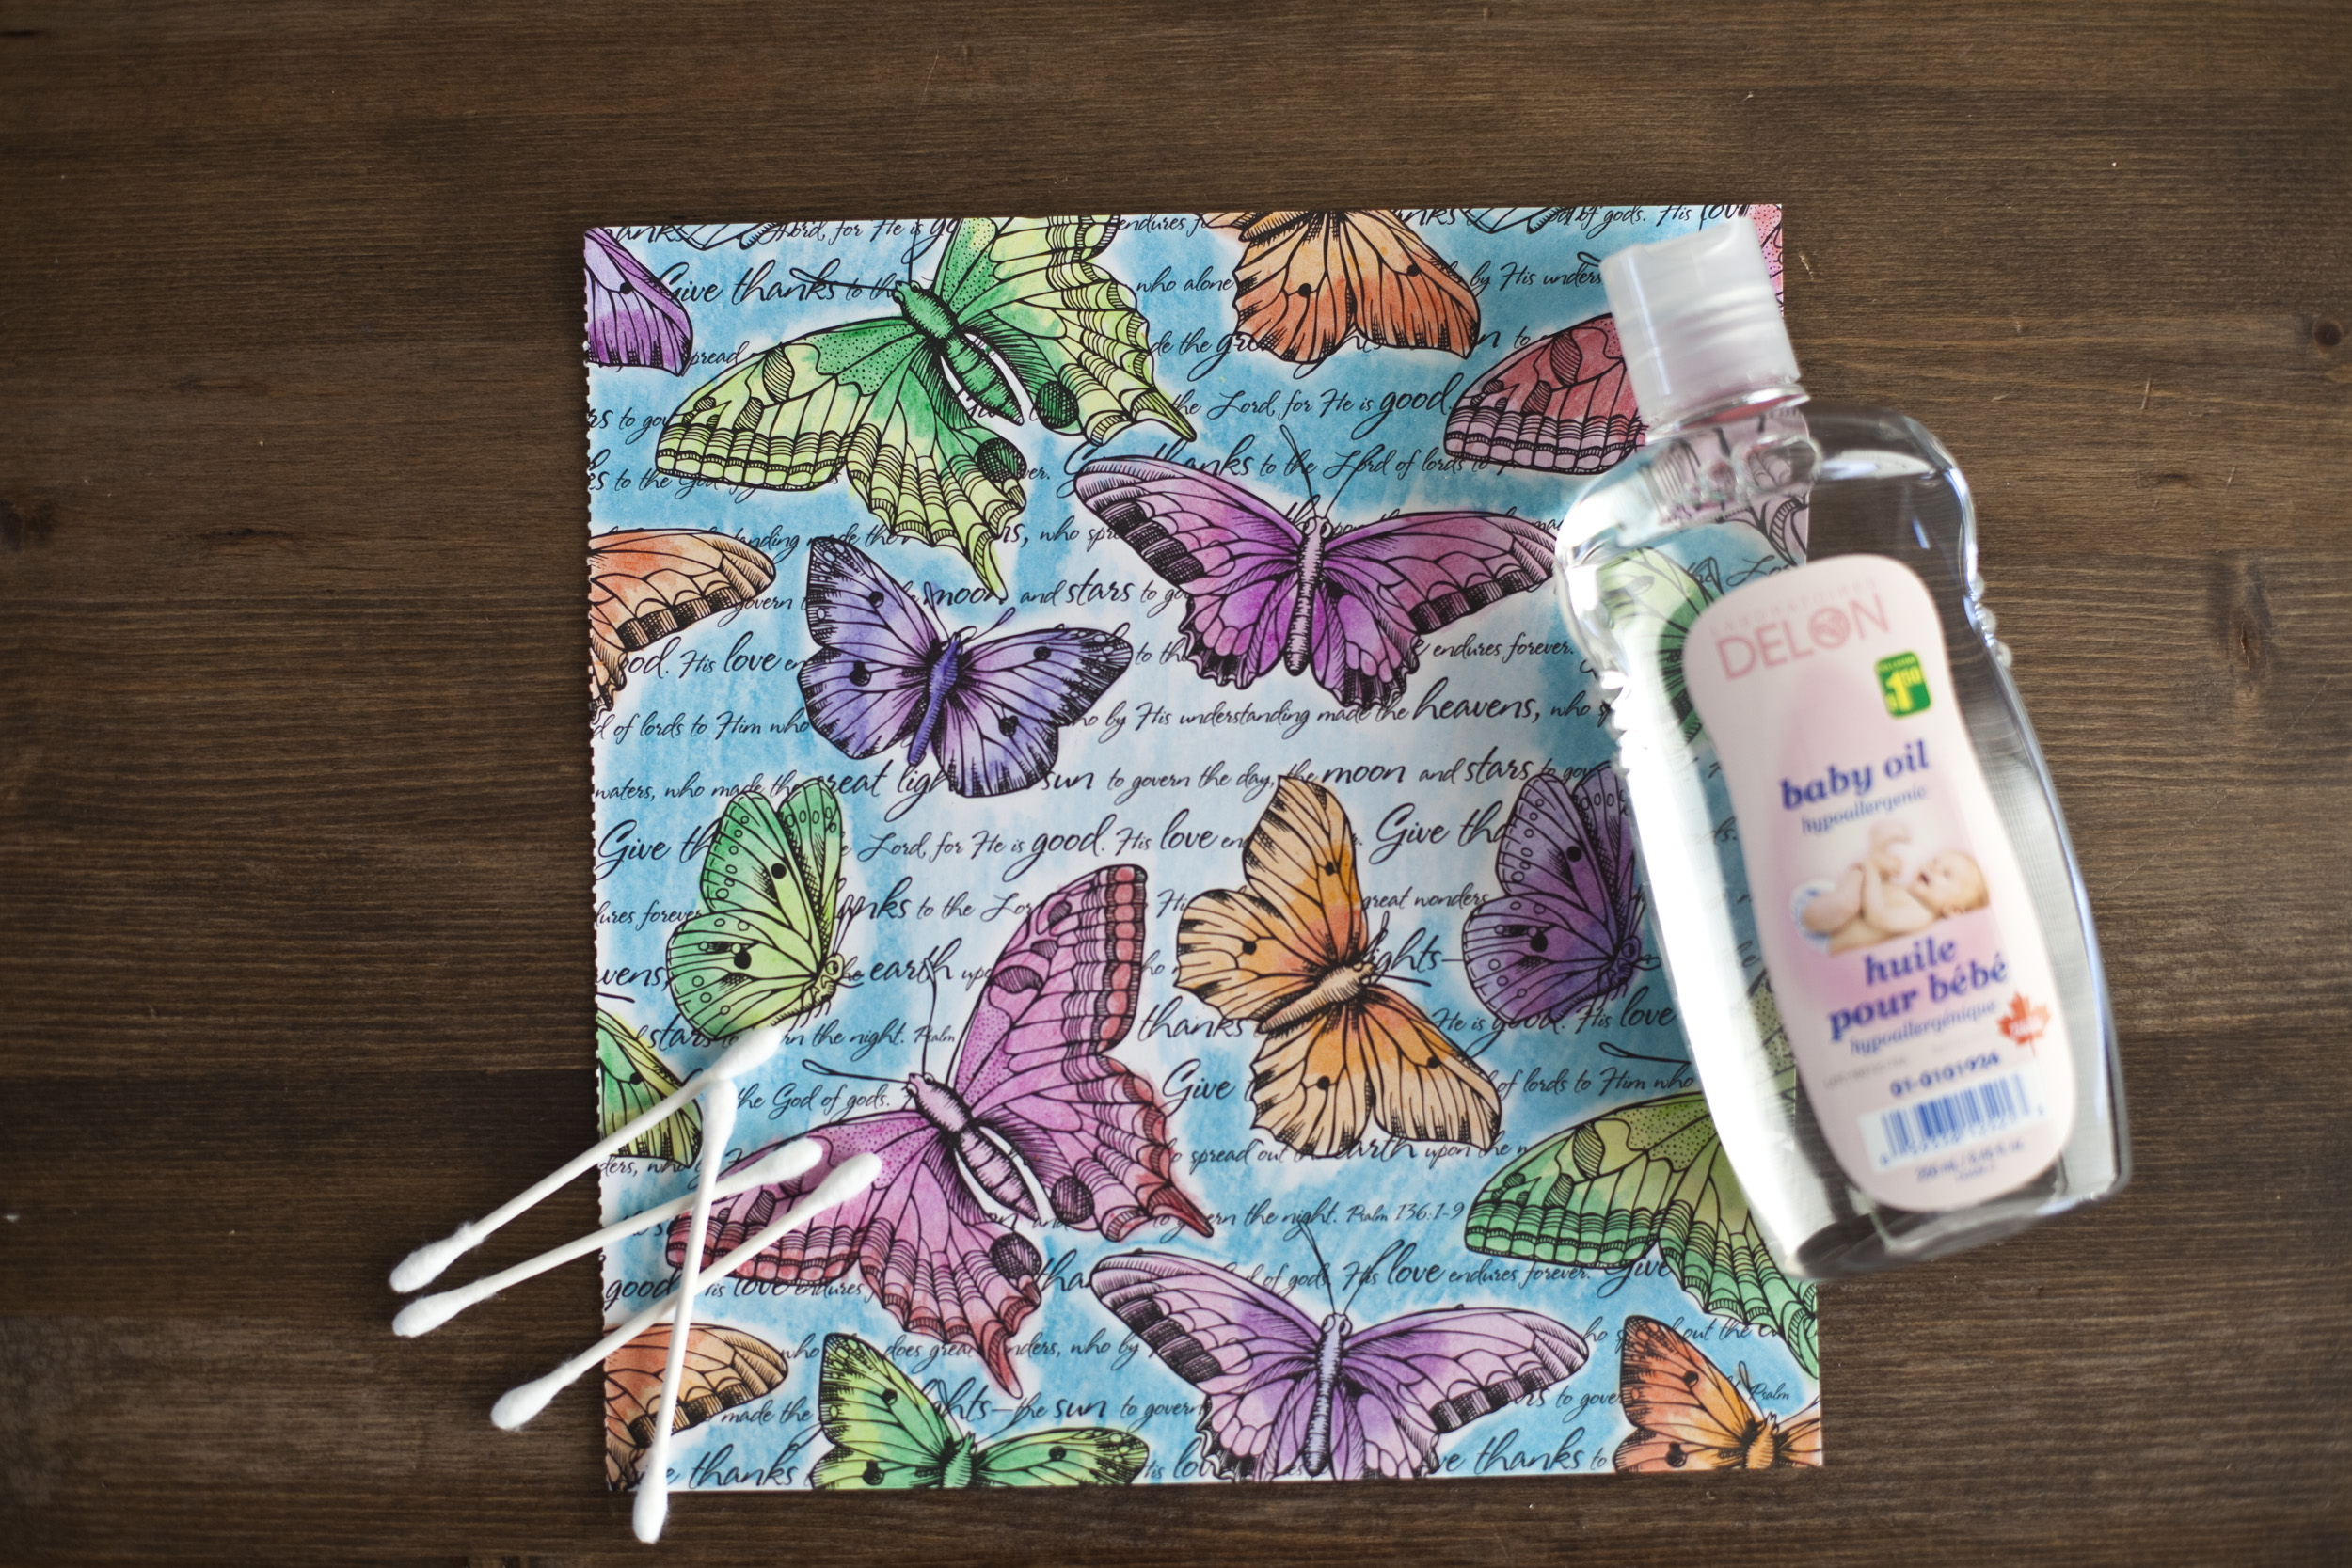 Coloring with Baby Oil and Crayons - use these simple supplies to create a great watercolor effect.